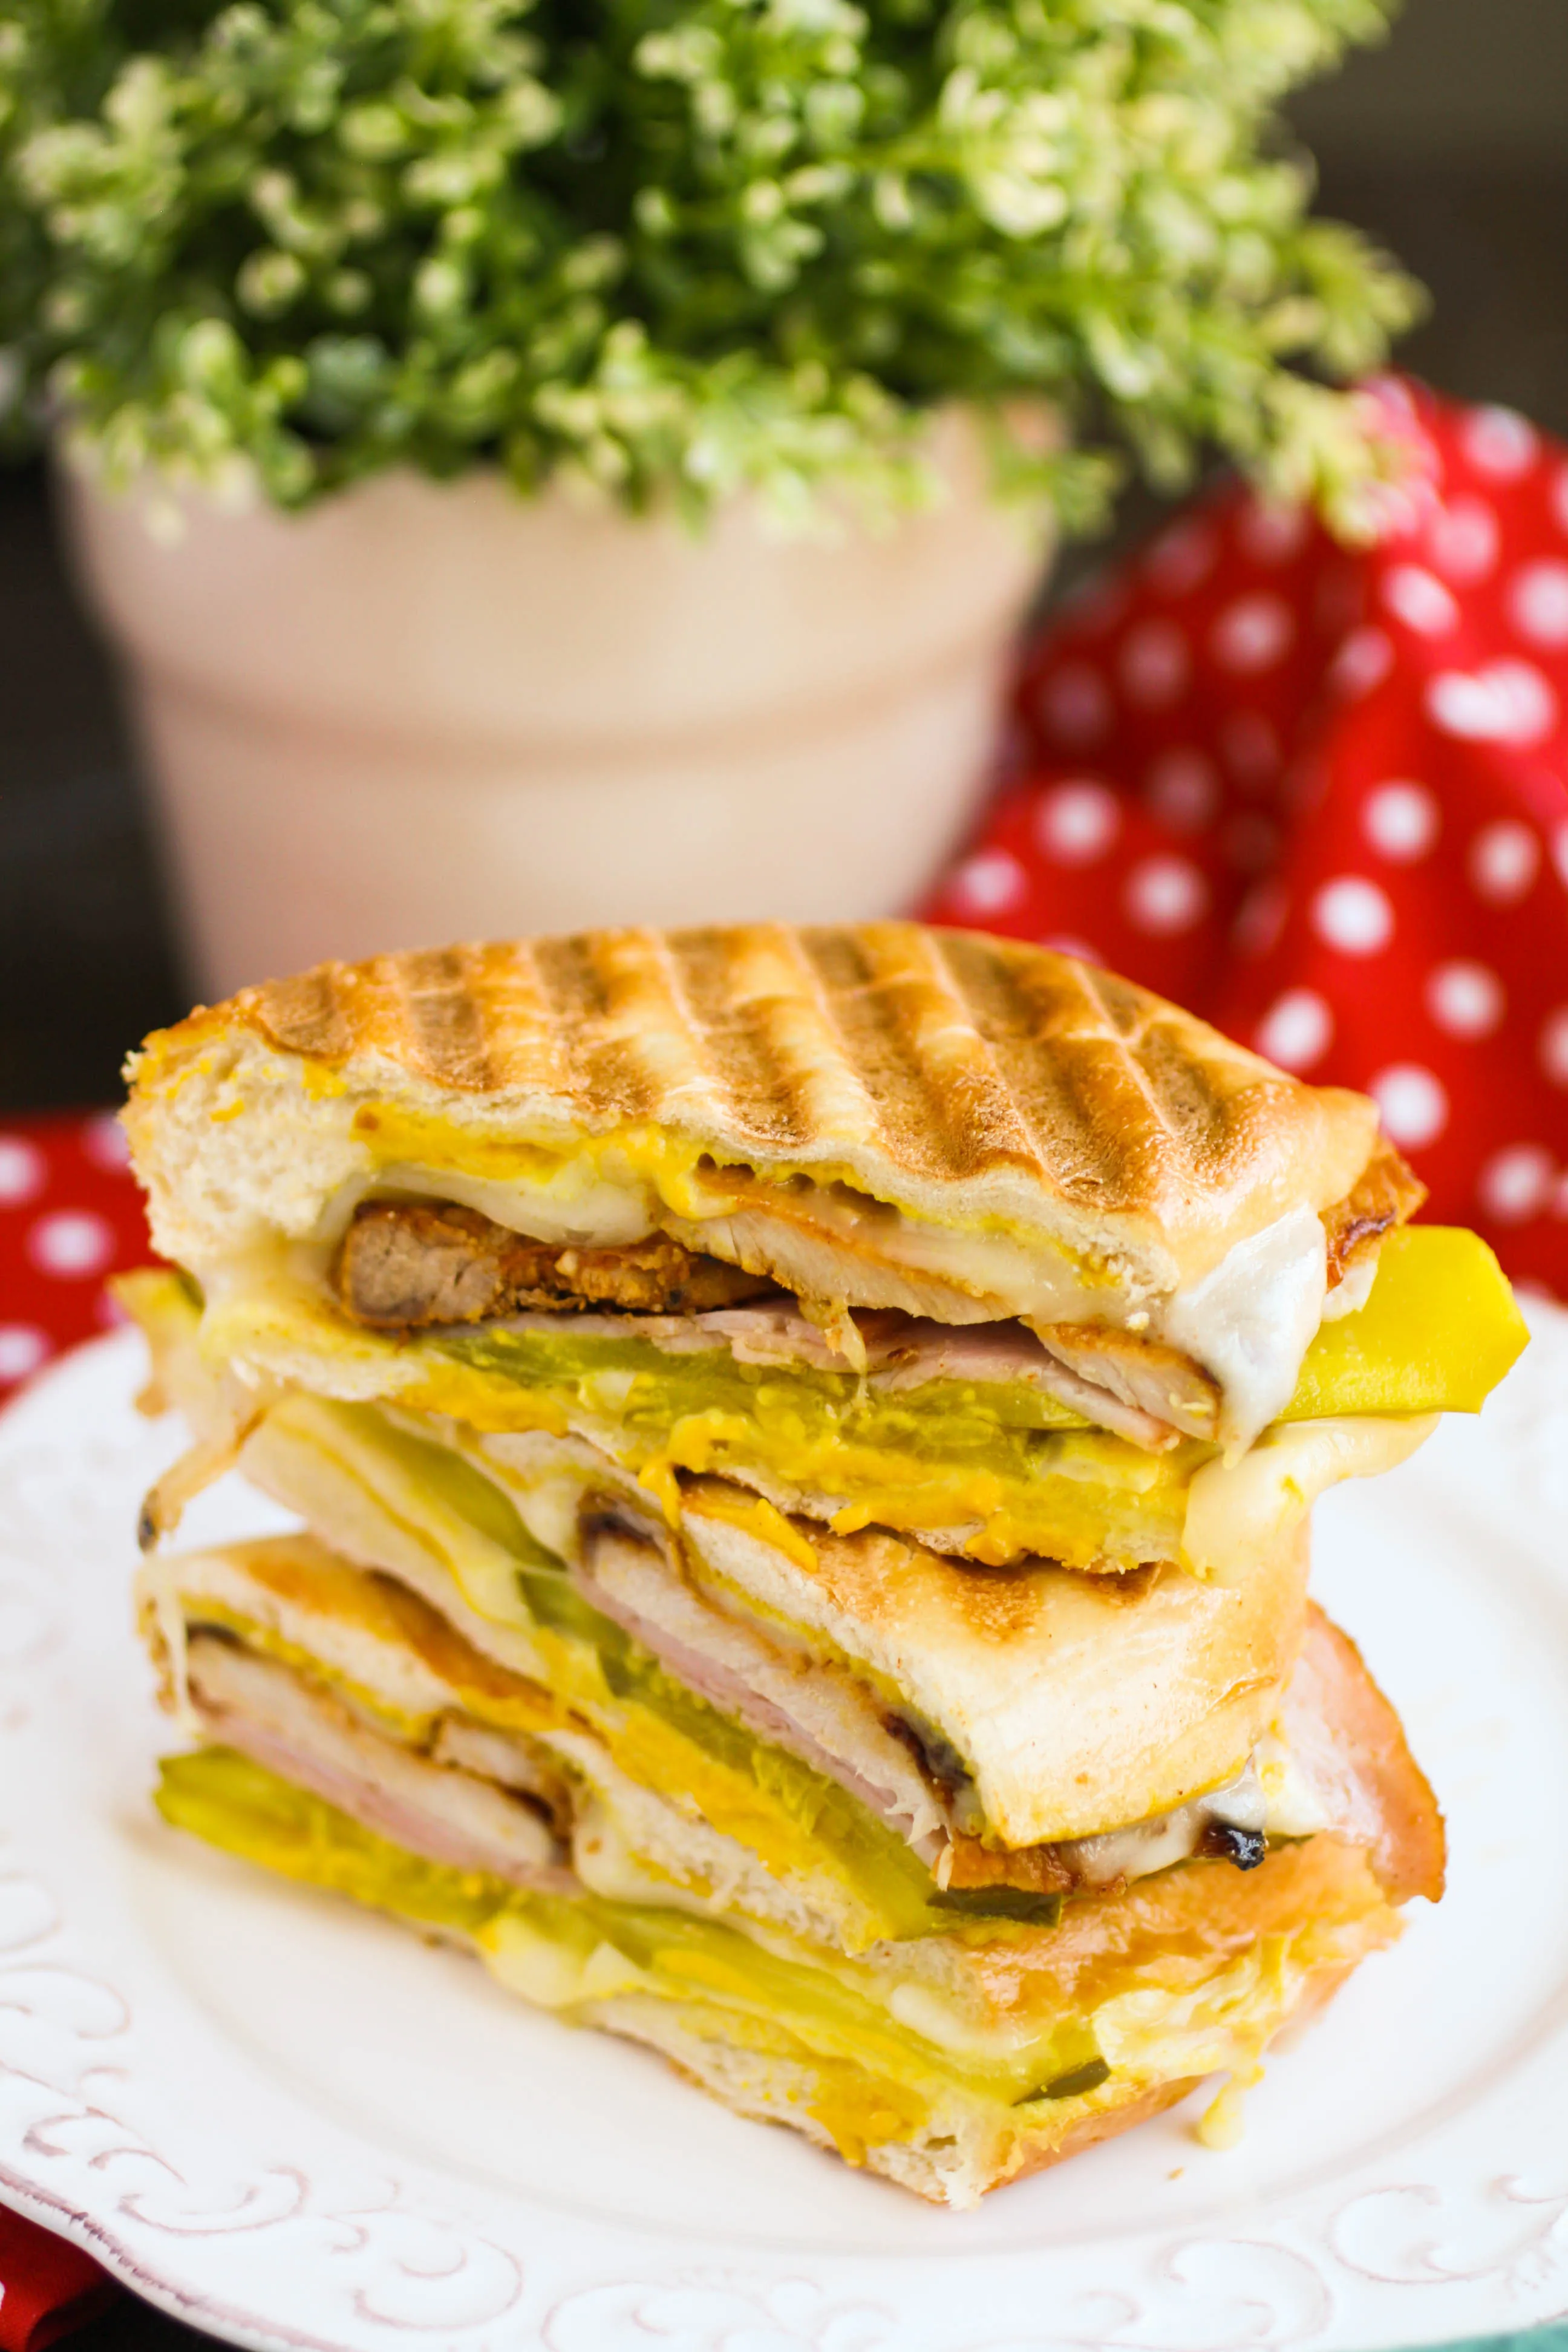 A Cuban Sandwich for lunch or dinner? Yes! They're hearty and delicious!